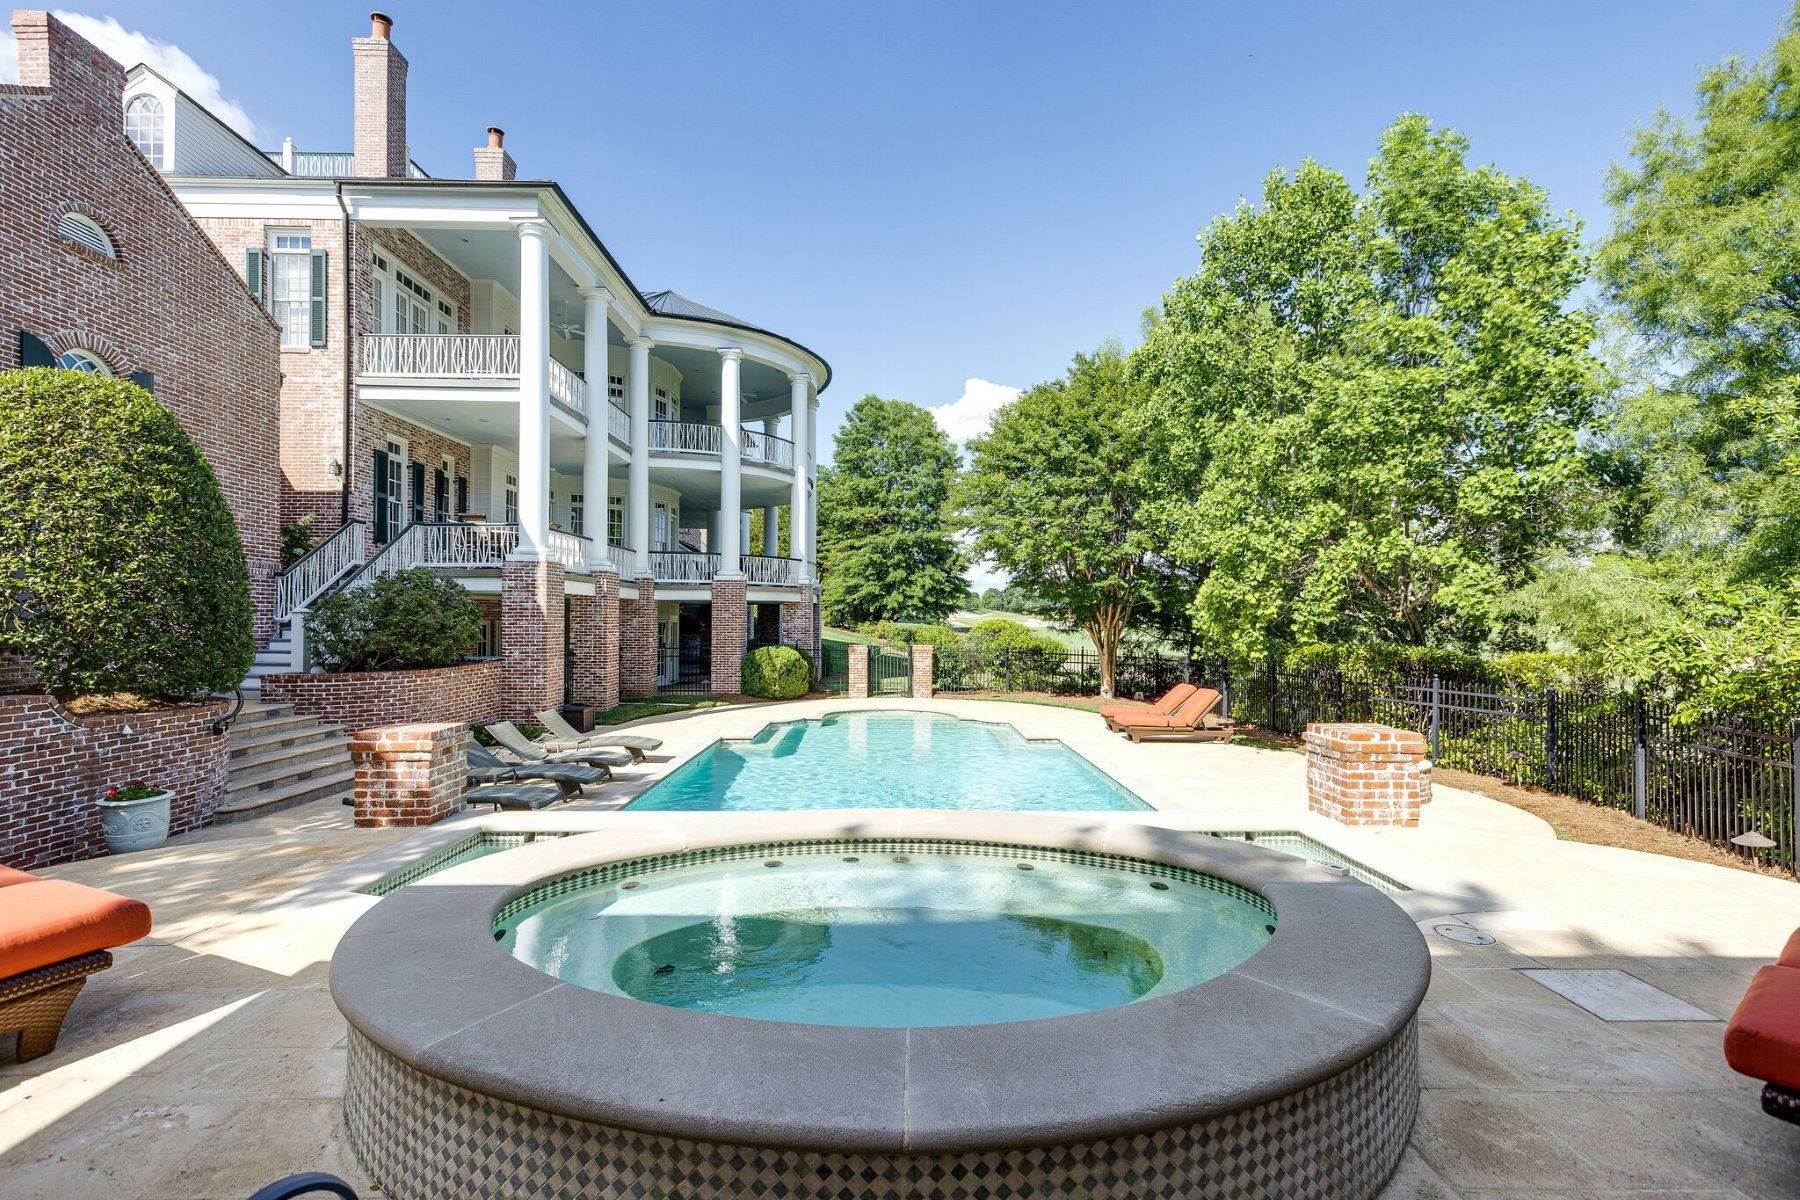 49. Single Family Homes for Sale at 32 Governors Way, Brentwood, TN, 37027 32 Governors Way Brentwood, Tennessee 37027 United States